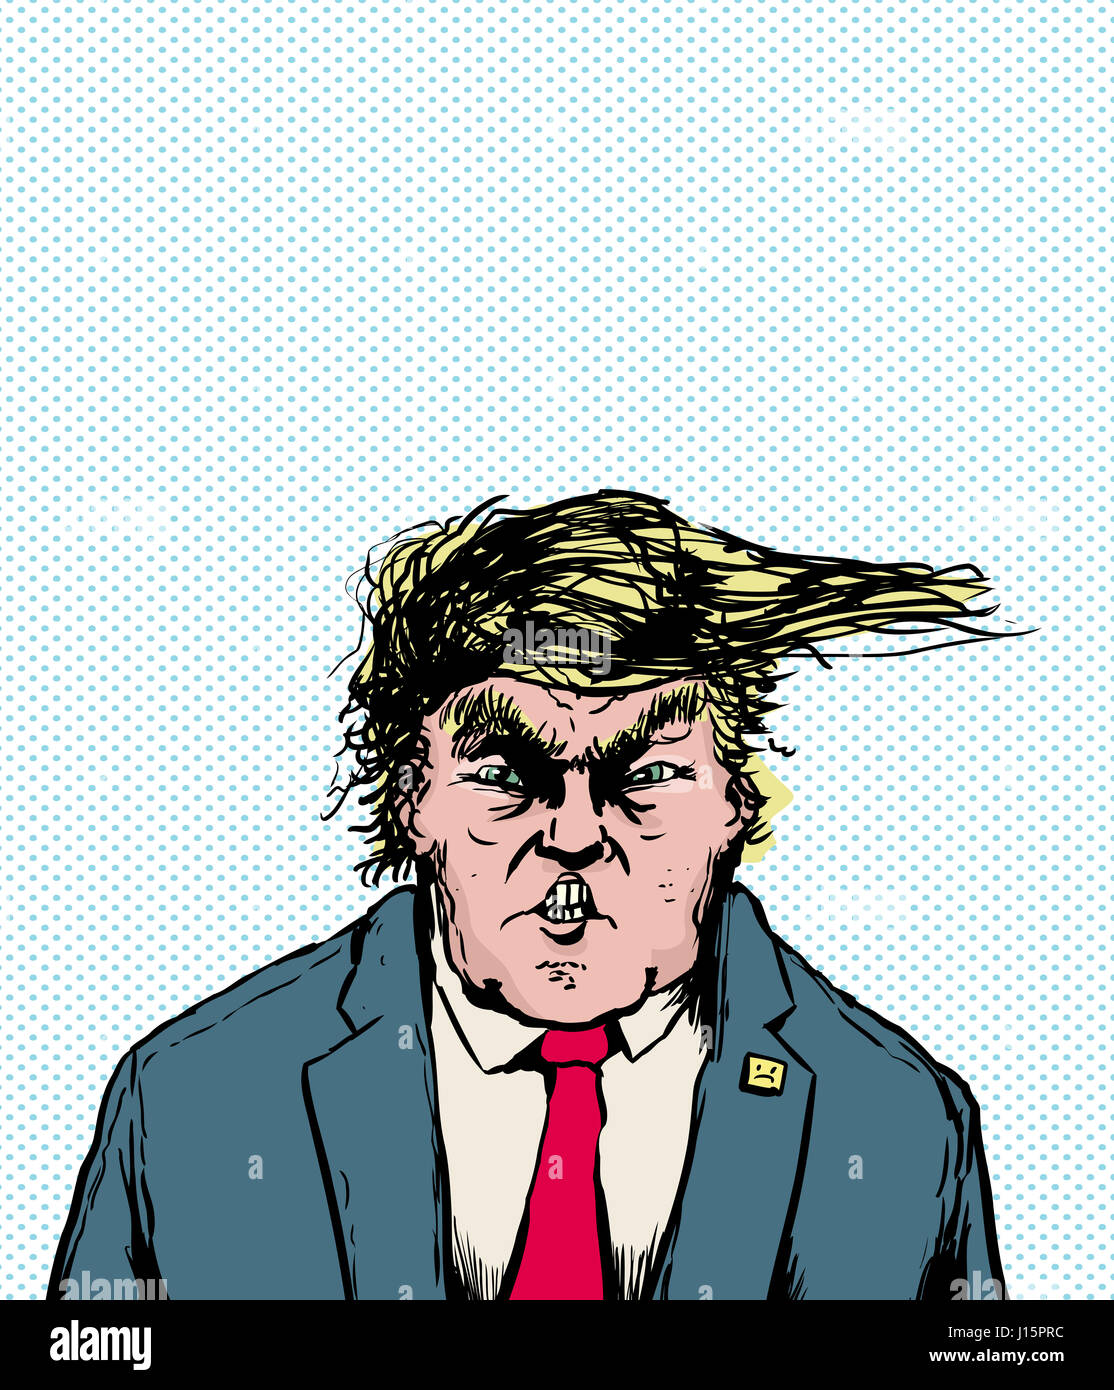 April 18, 2017. Caricature of Donald Trump with clenched teeth and hairdo blowing sideways Stock Photo